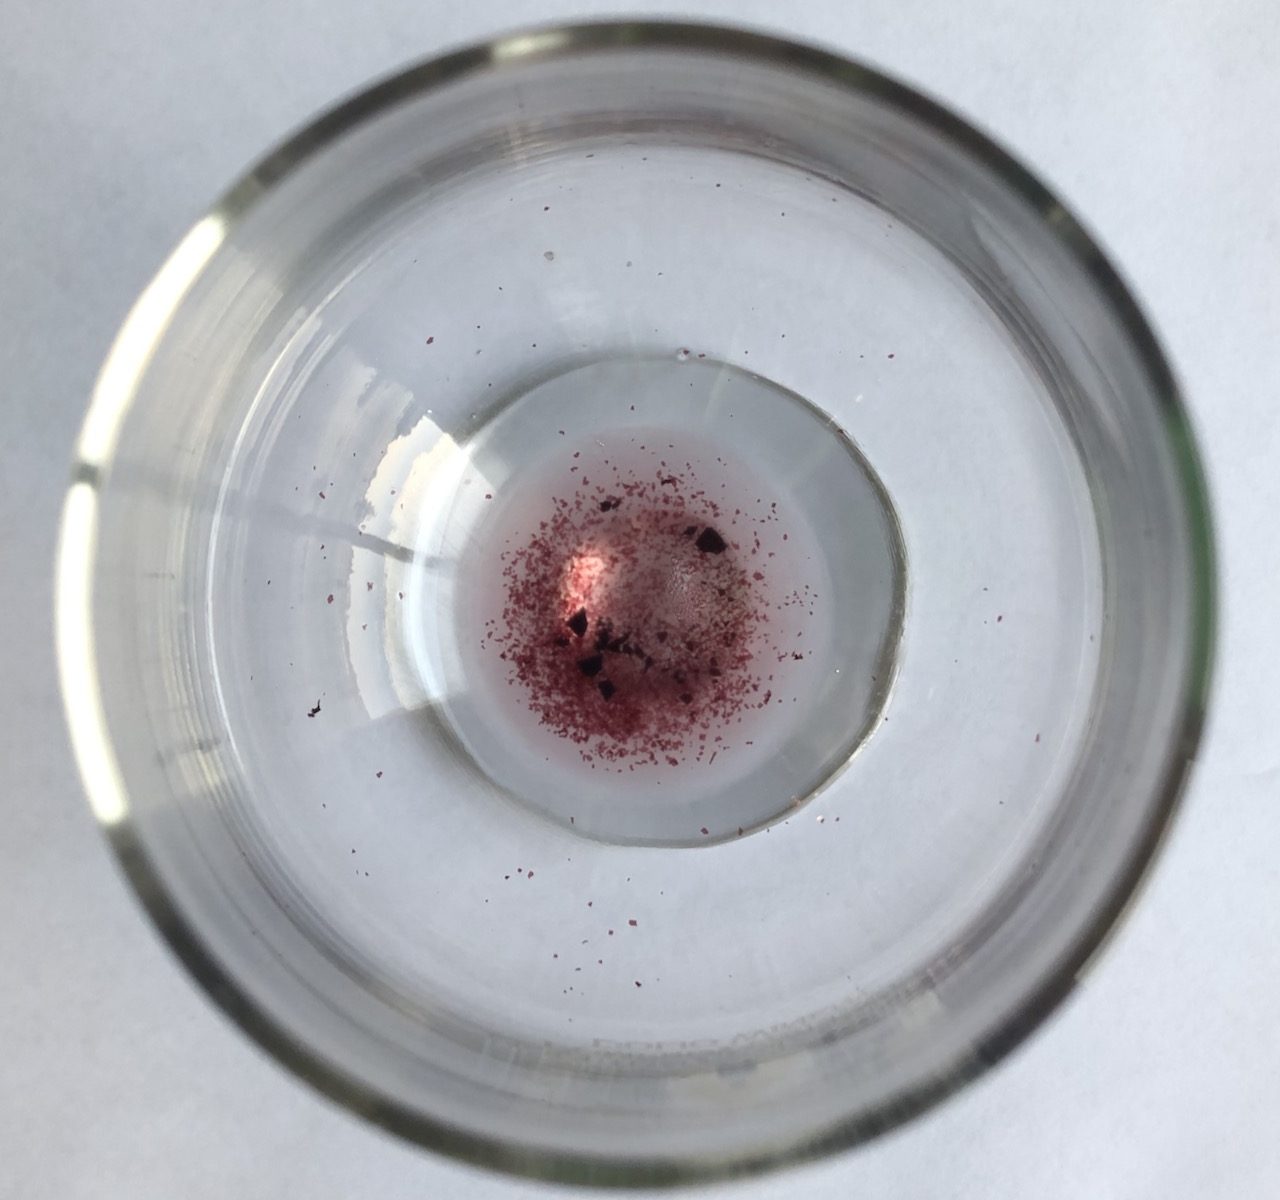 Sediment at the bottom of wine glass